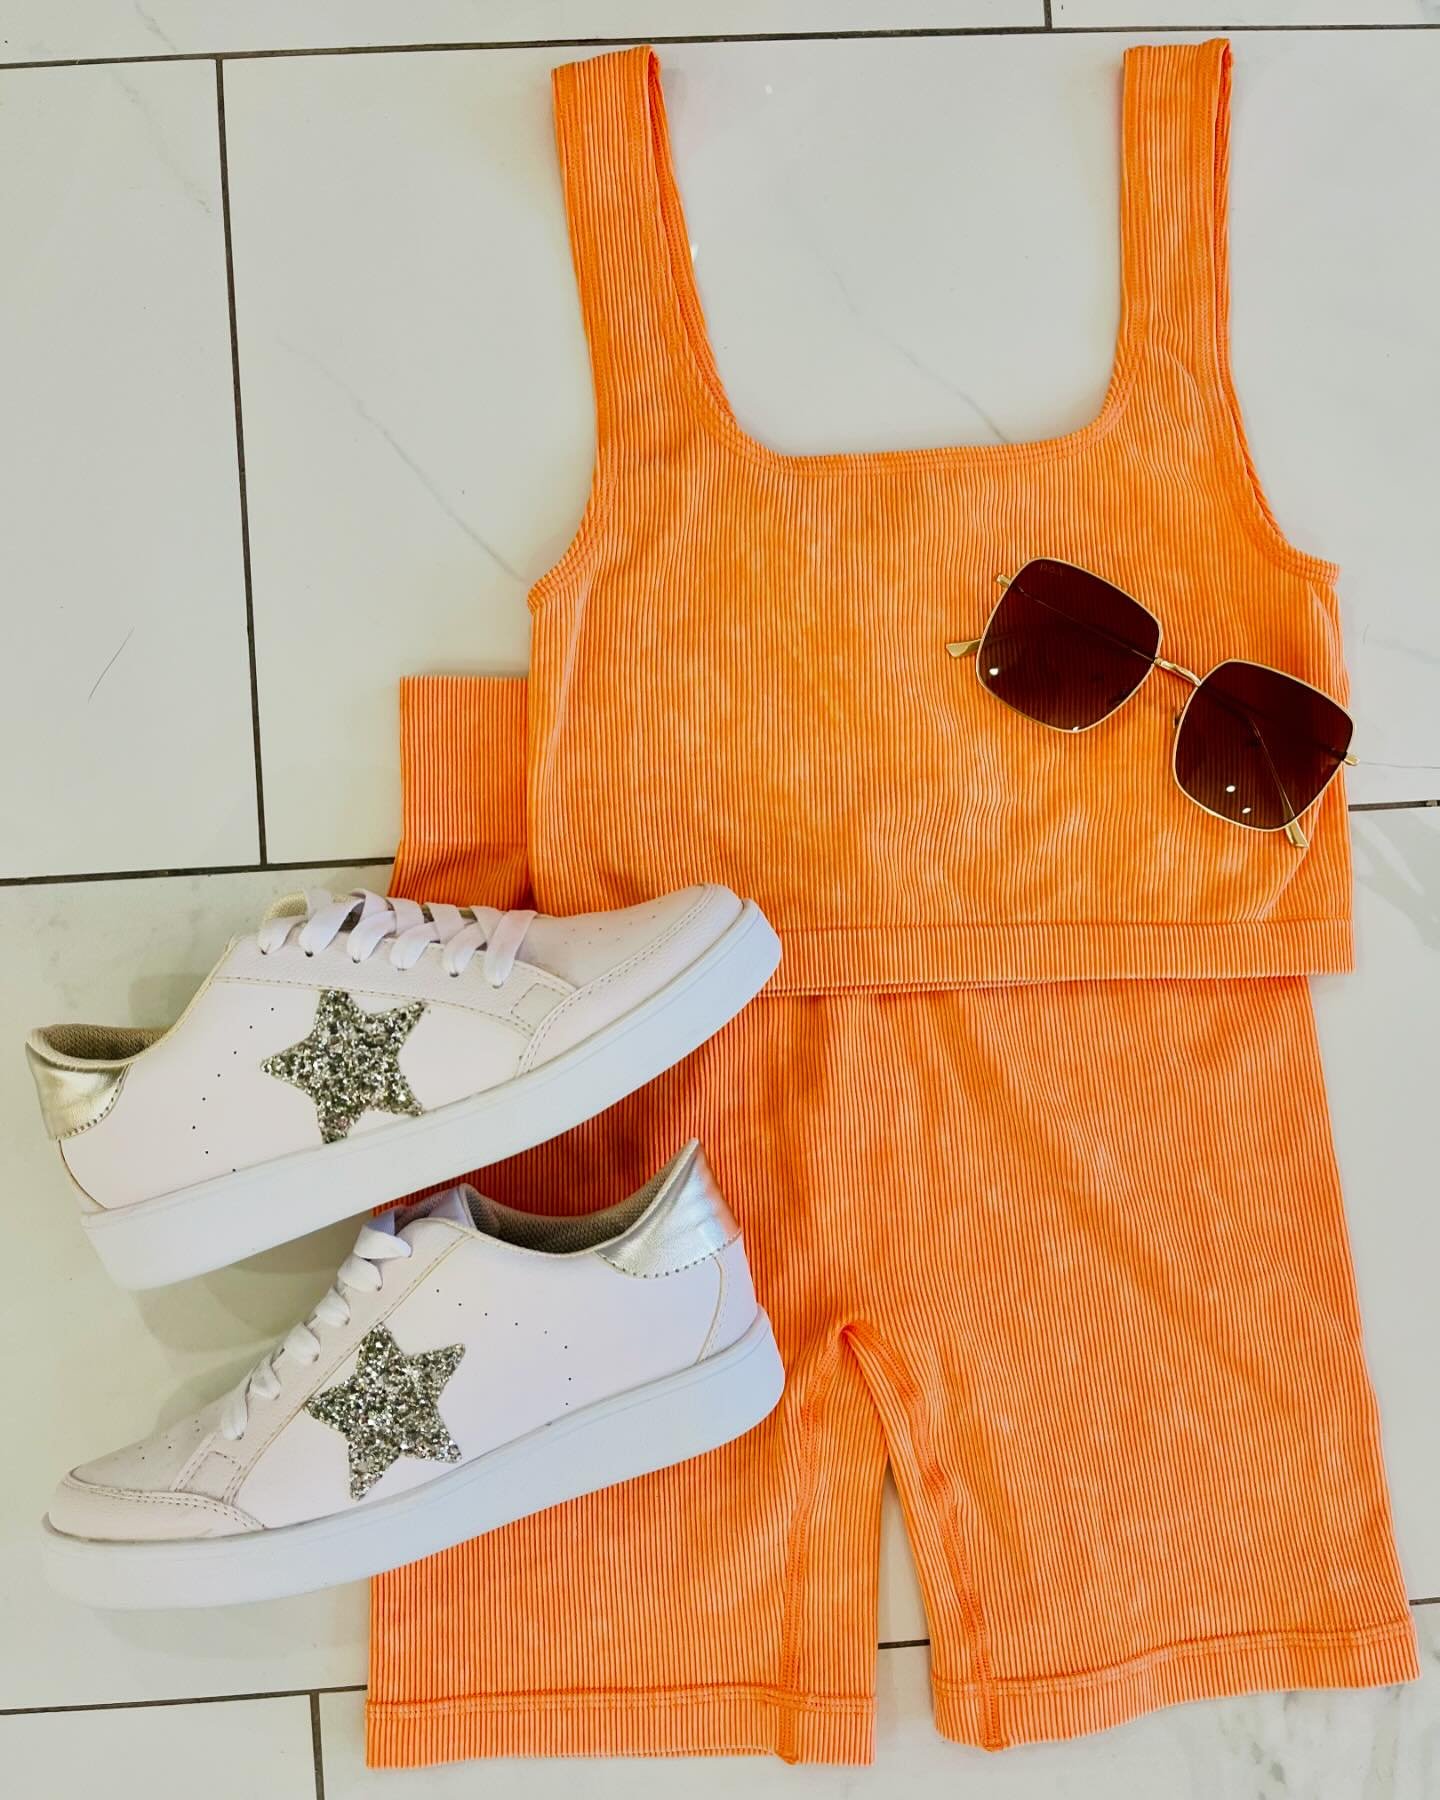 Summer is around the corner ☀️🌼💛

Wanting to get your summer body ready?? TBB has you covered with this cute workout set for ONLY $38! 💪🏼✨

🎂🪩 TBB IS TURNING ONE 🪩🎂
Join us on Saturday, June 8th 10am-3pm! 

We are going to have
&bull;Champagn